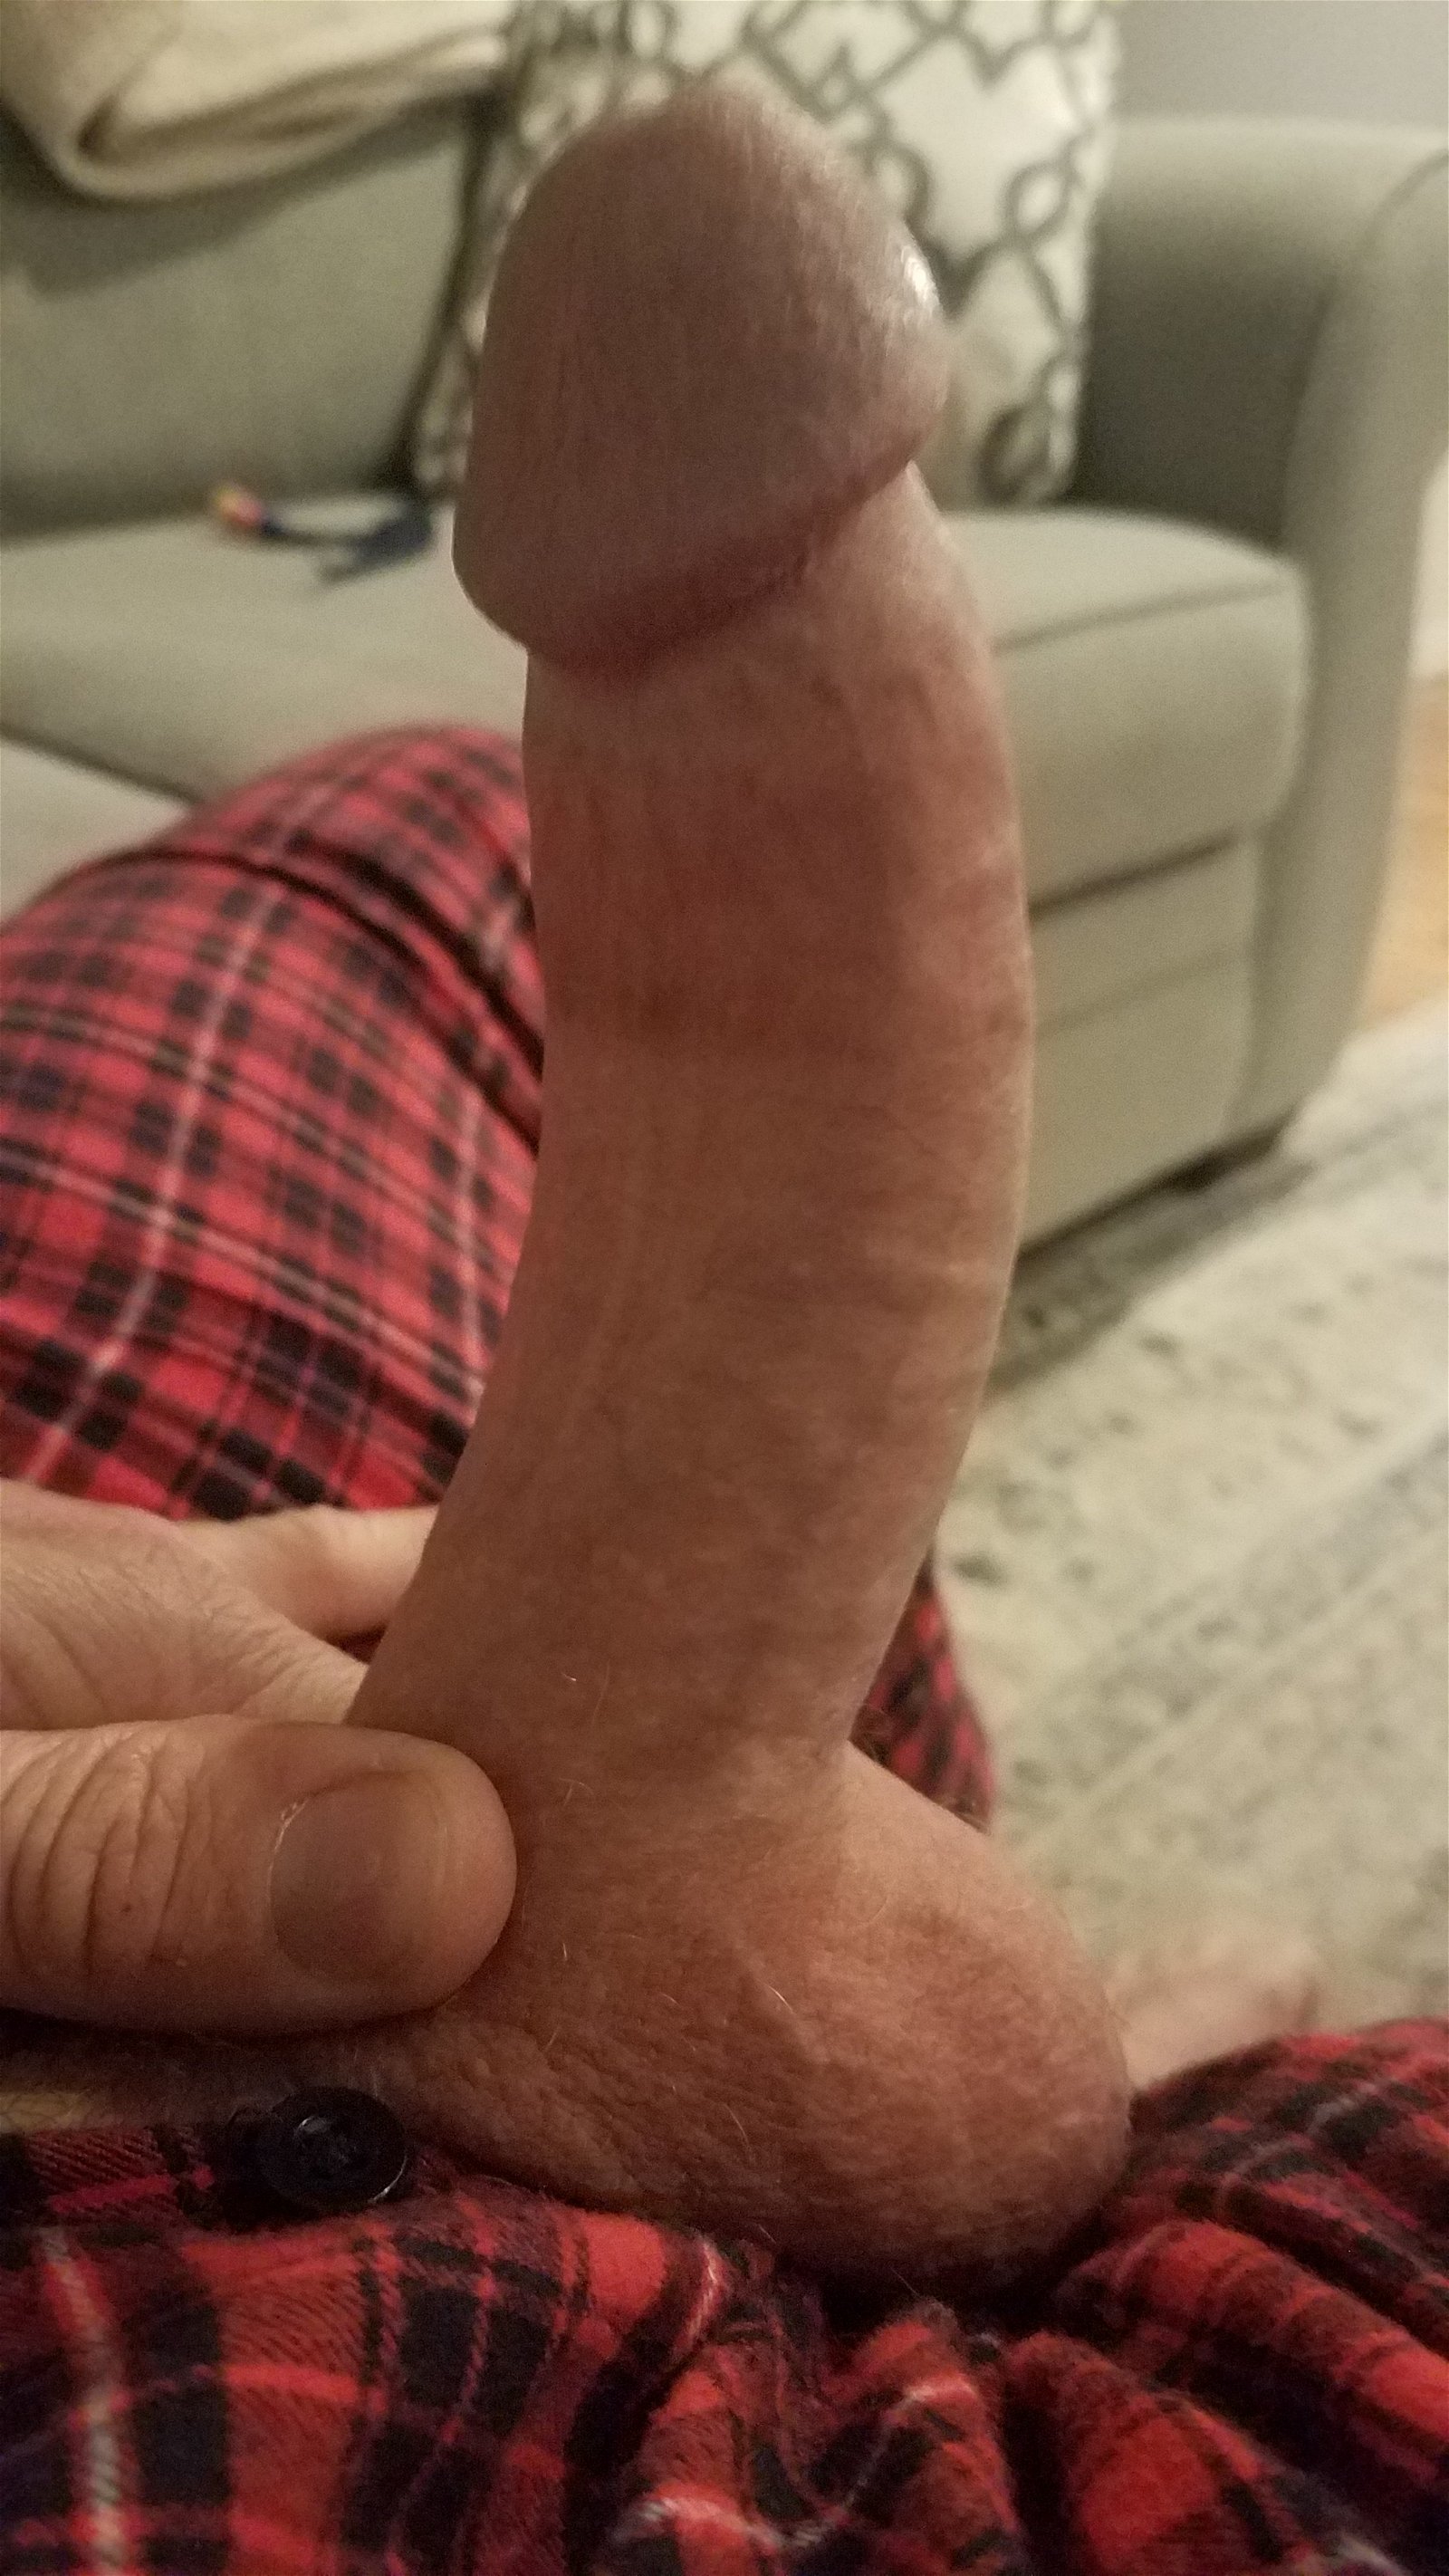 Photo by Justalittlefun with the username @Justalittlefun,  November 15, 2019 at 3:27 PM. The post is about the topic Rate my pussy or dick